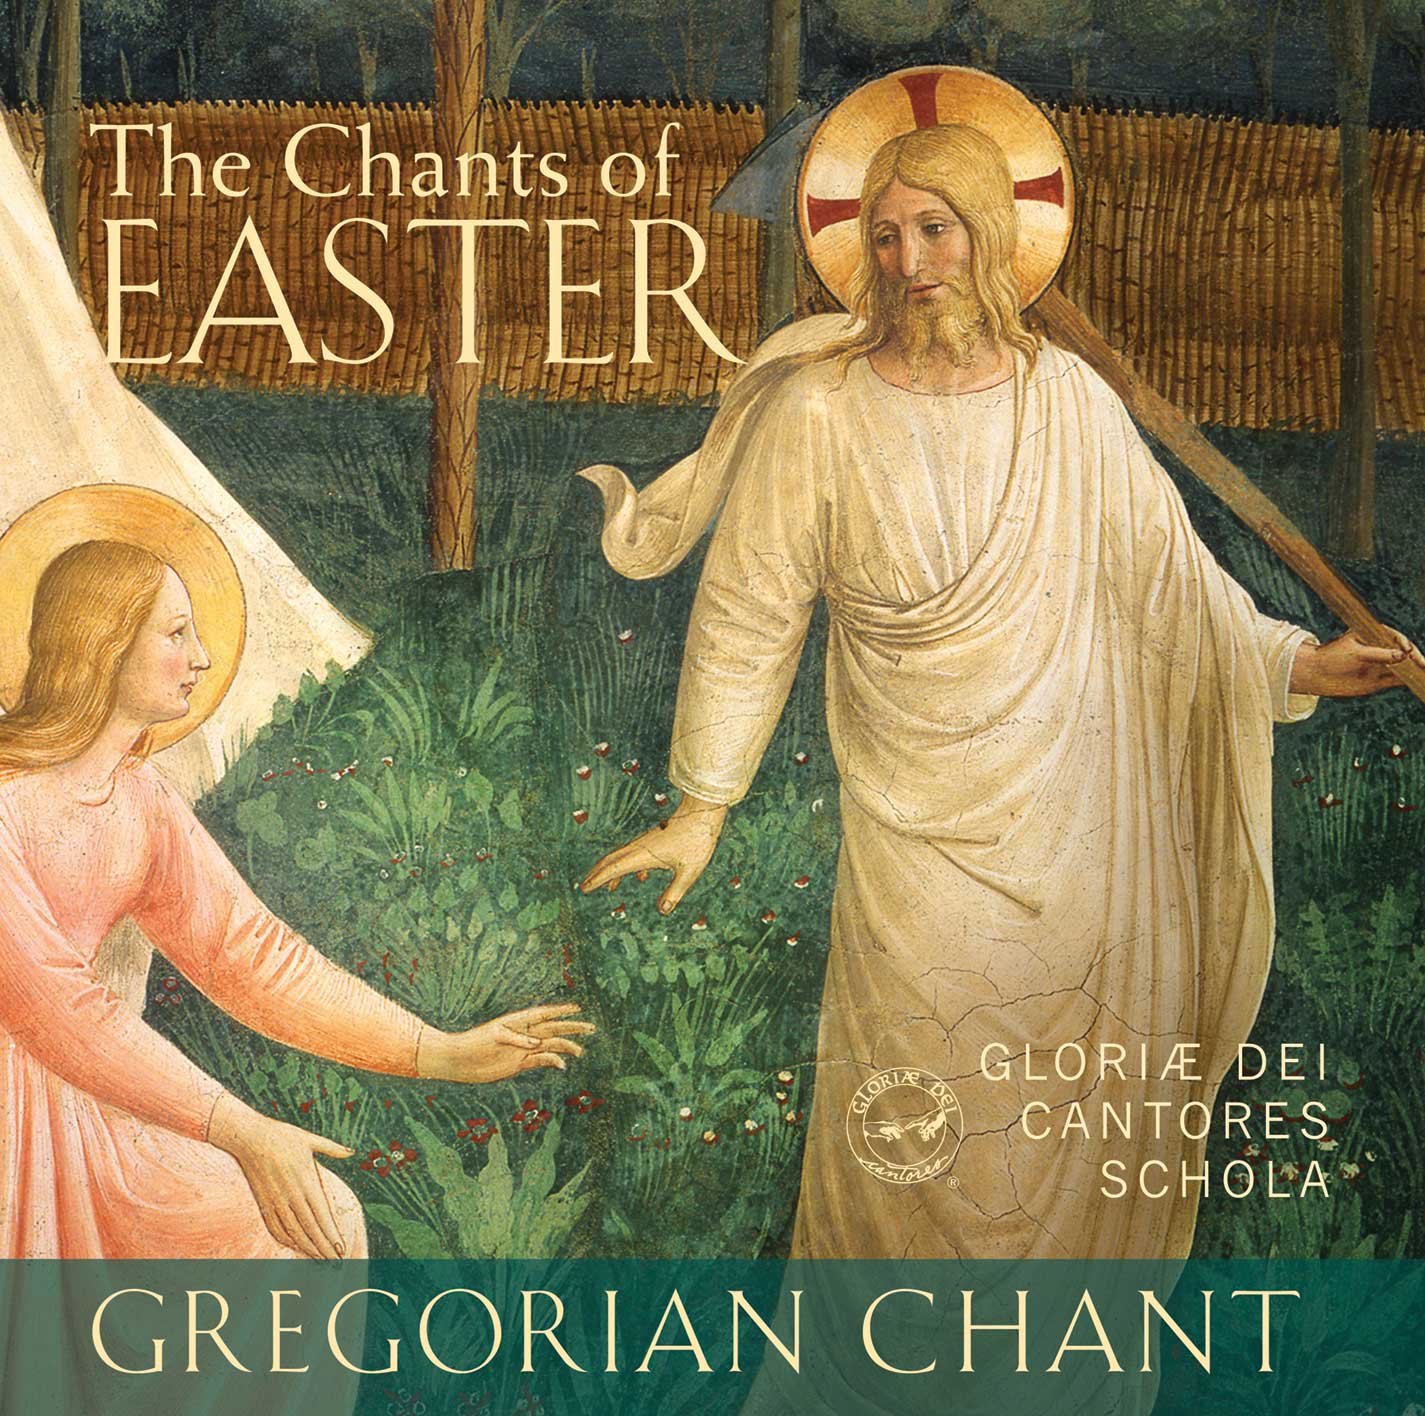 product image of 'The Chants of Easter' Gloriae Dei Cantores Schola Gregorian Chant recording